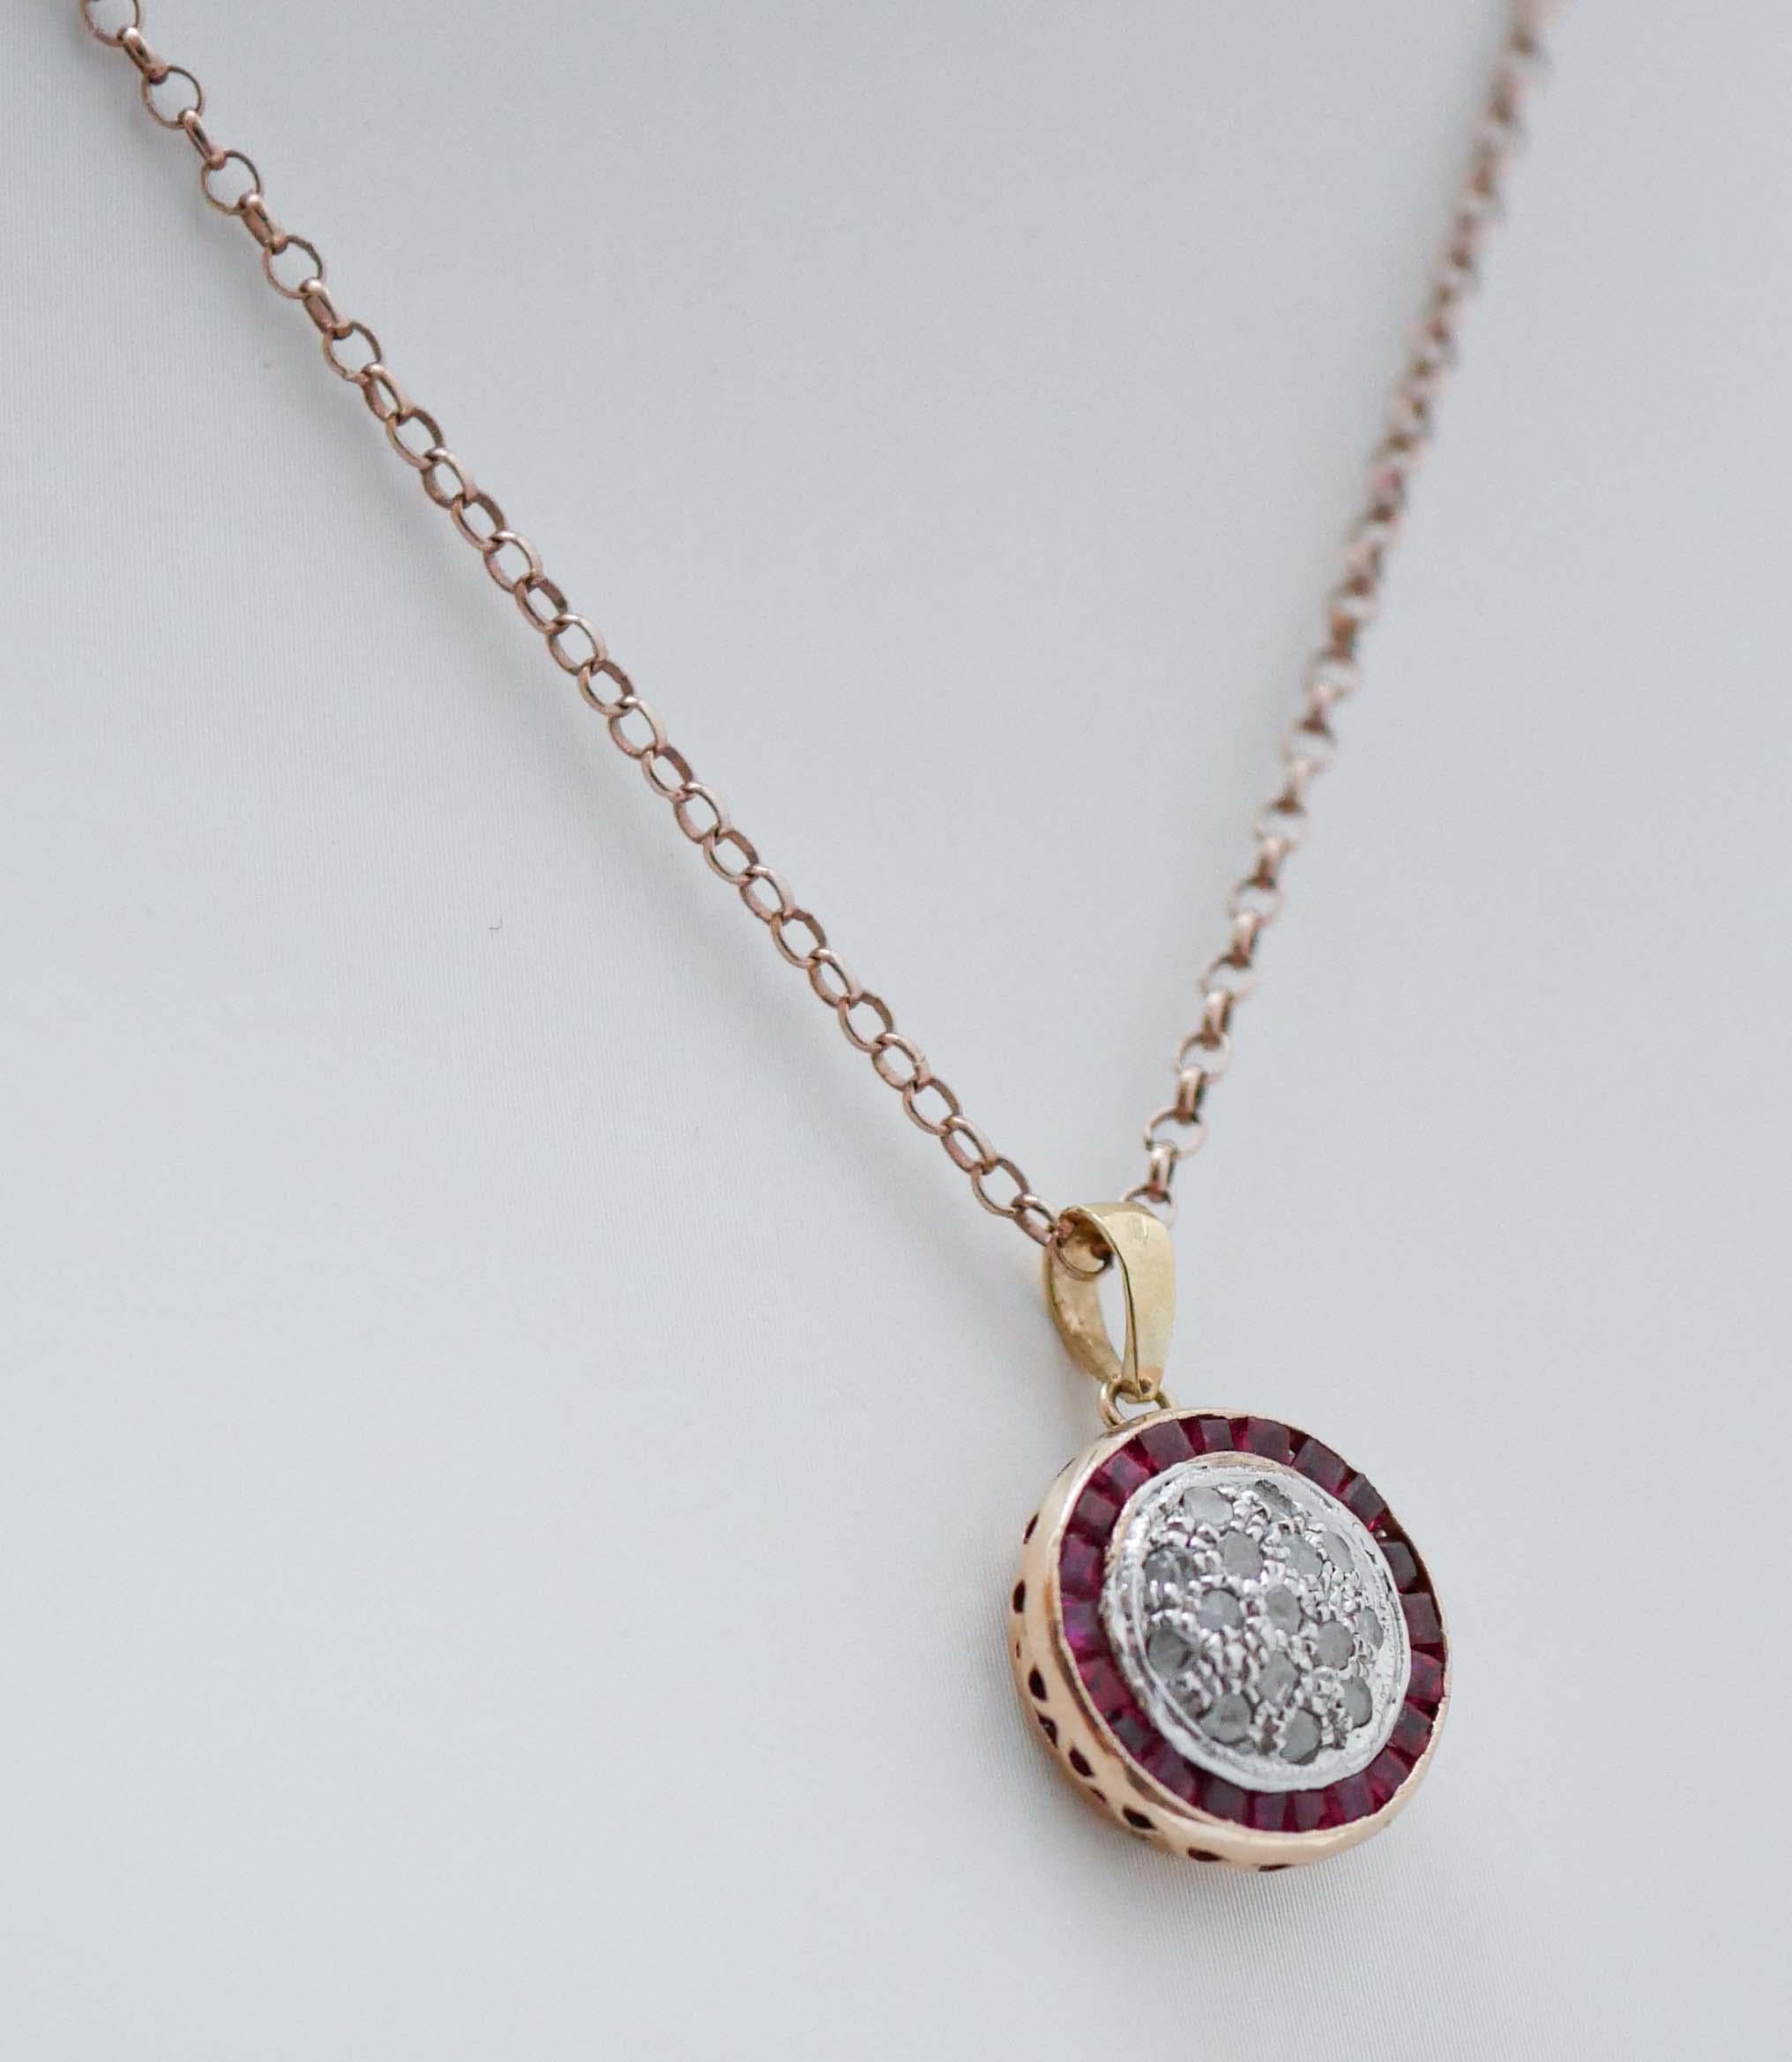 Retro Rubies, Diamonds, Rose Gold and Silver Pendant Necklace.